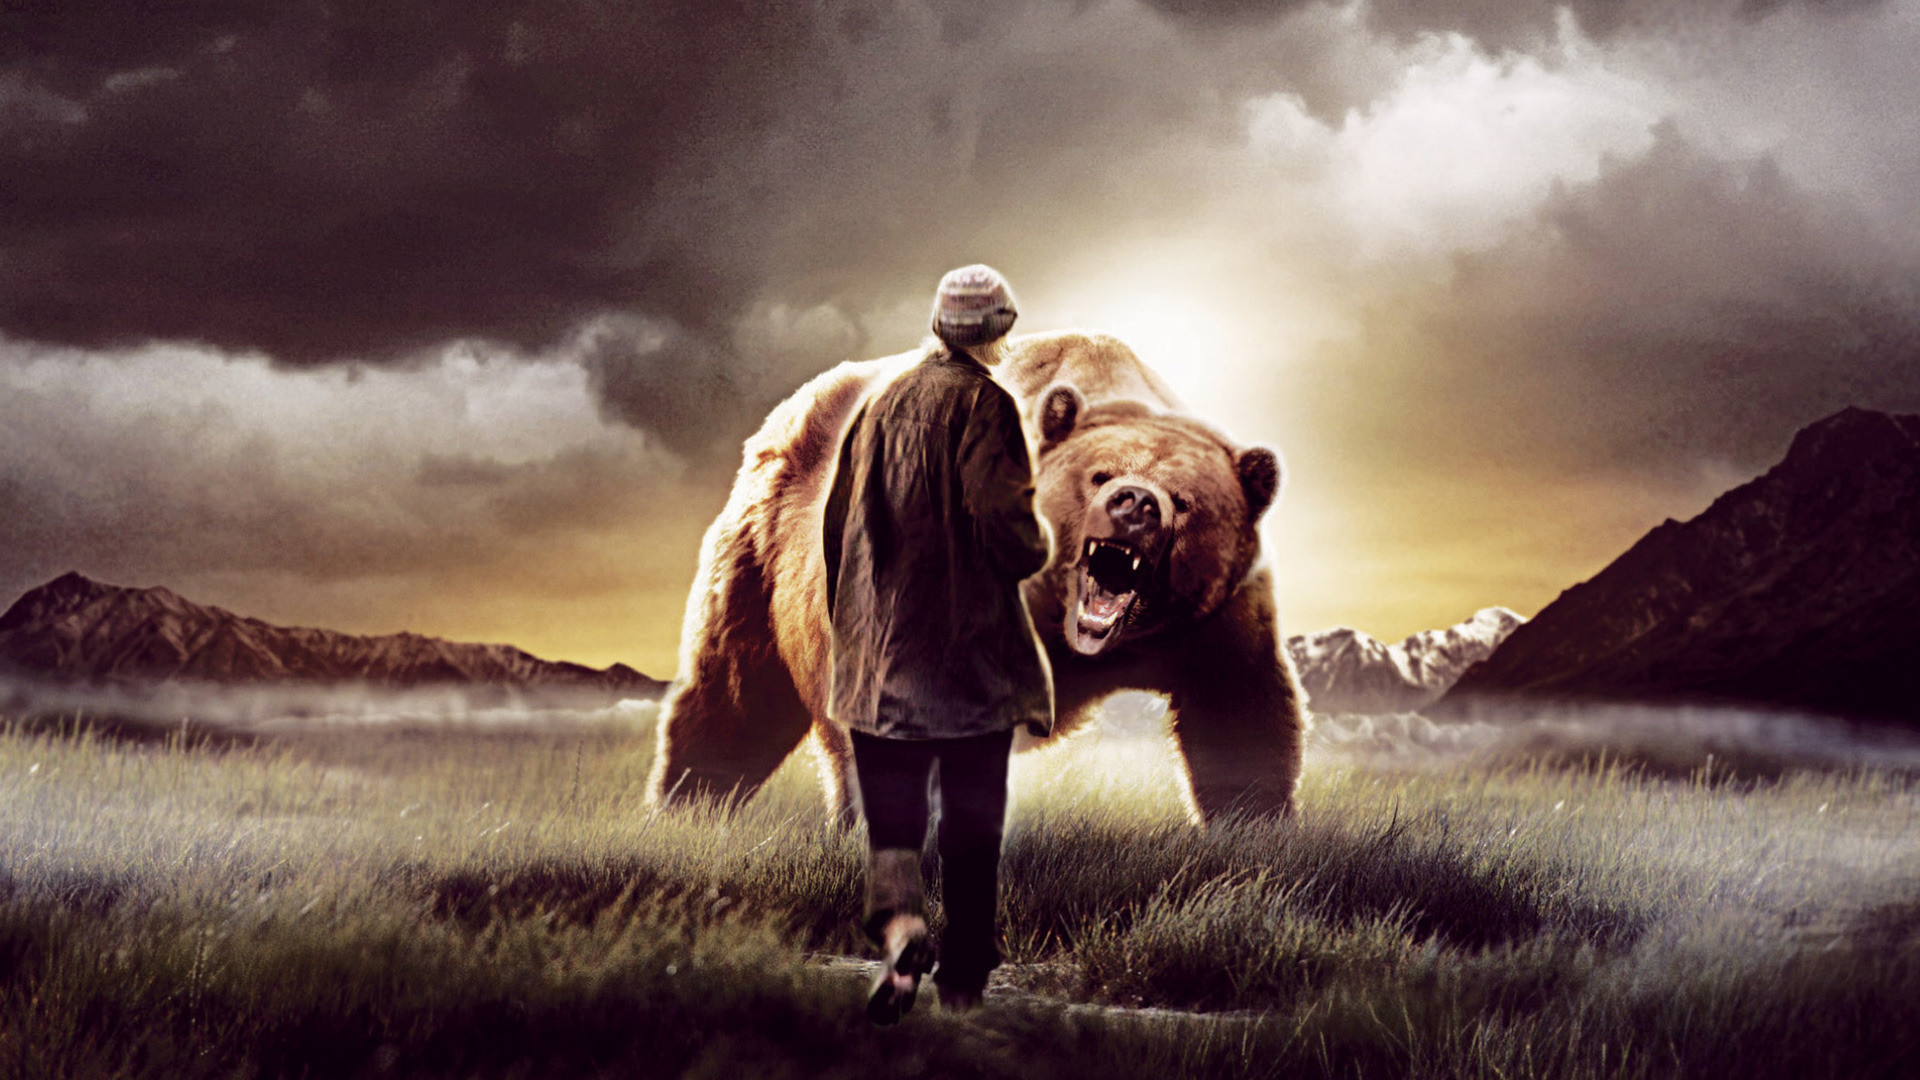 Wallpaper Angry Grizzly Bear Image Pictures Photos Icons